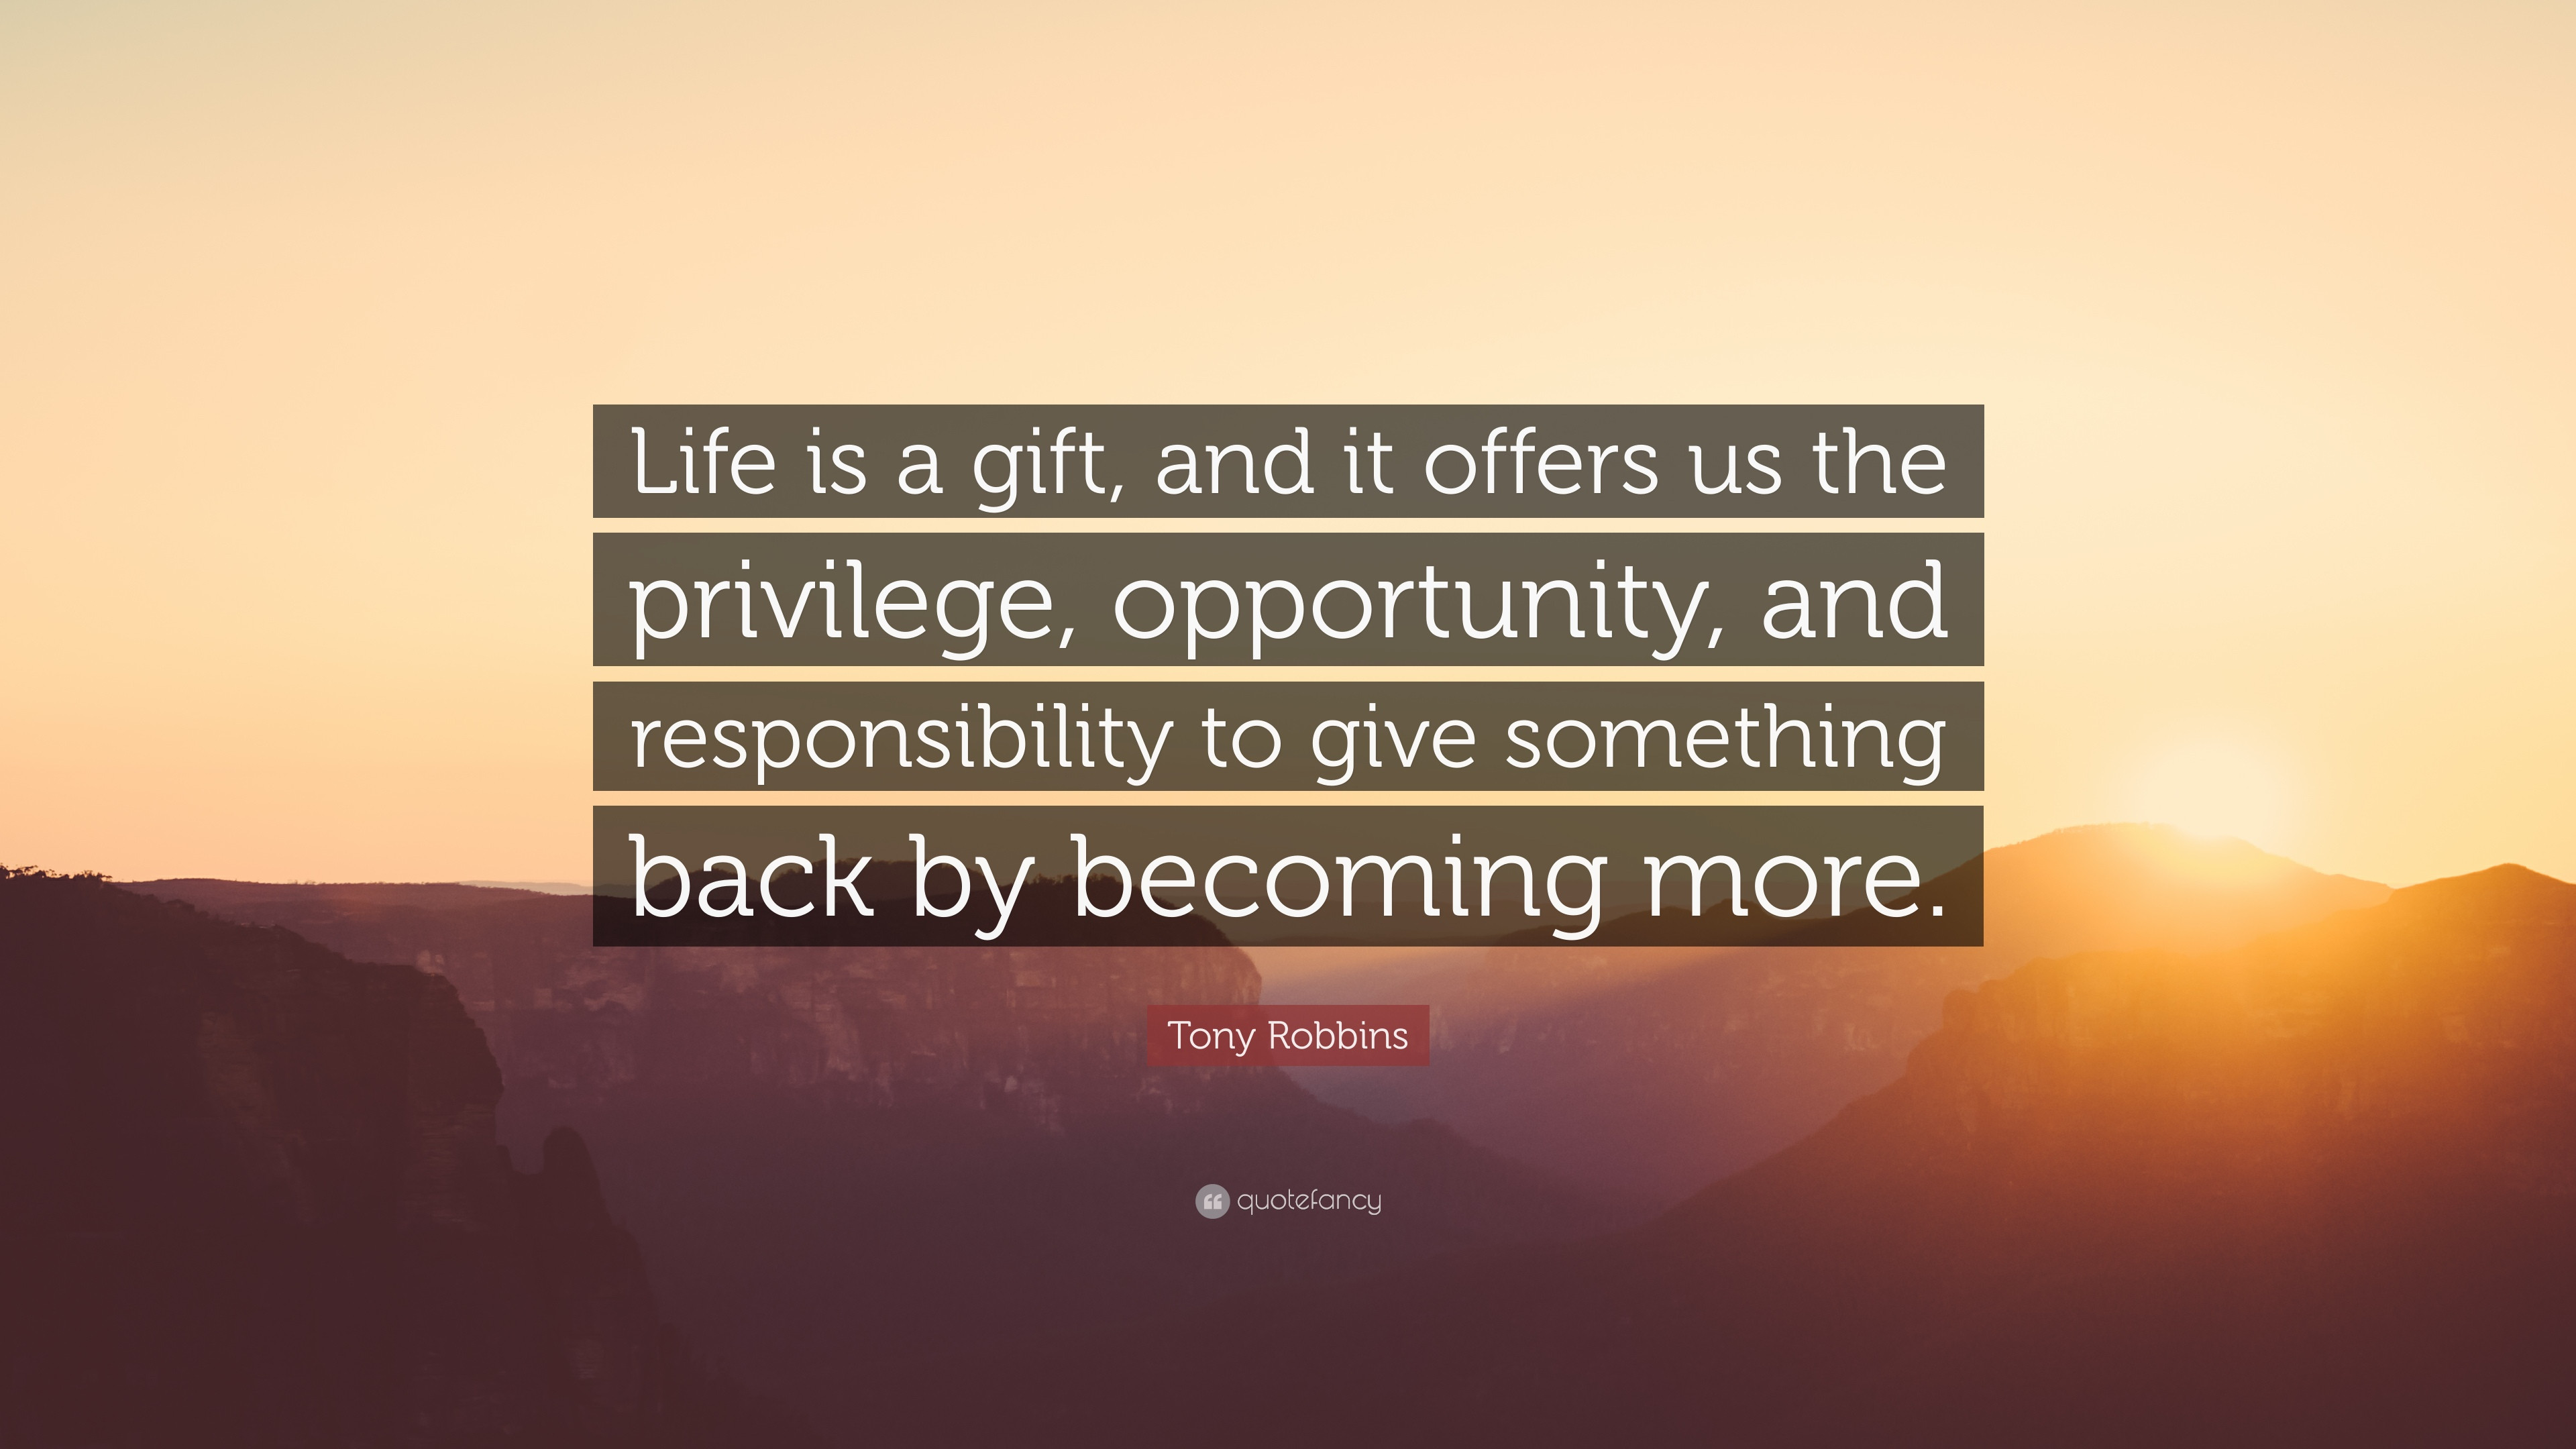 Life Is A Gift Quotes
 Tony Robbins Quotes 100 wallpapers Quotefancy